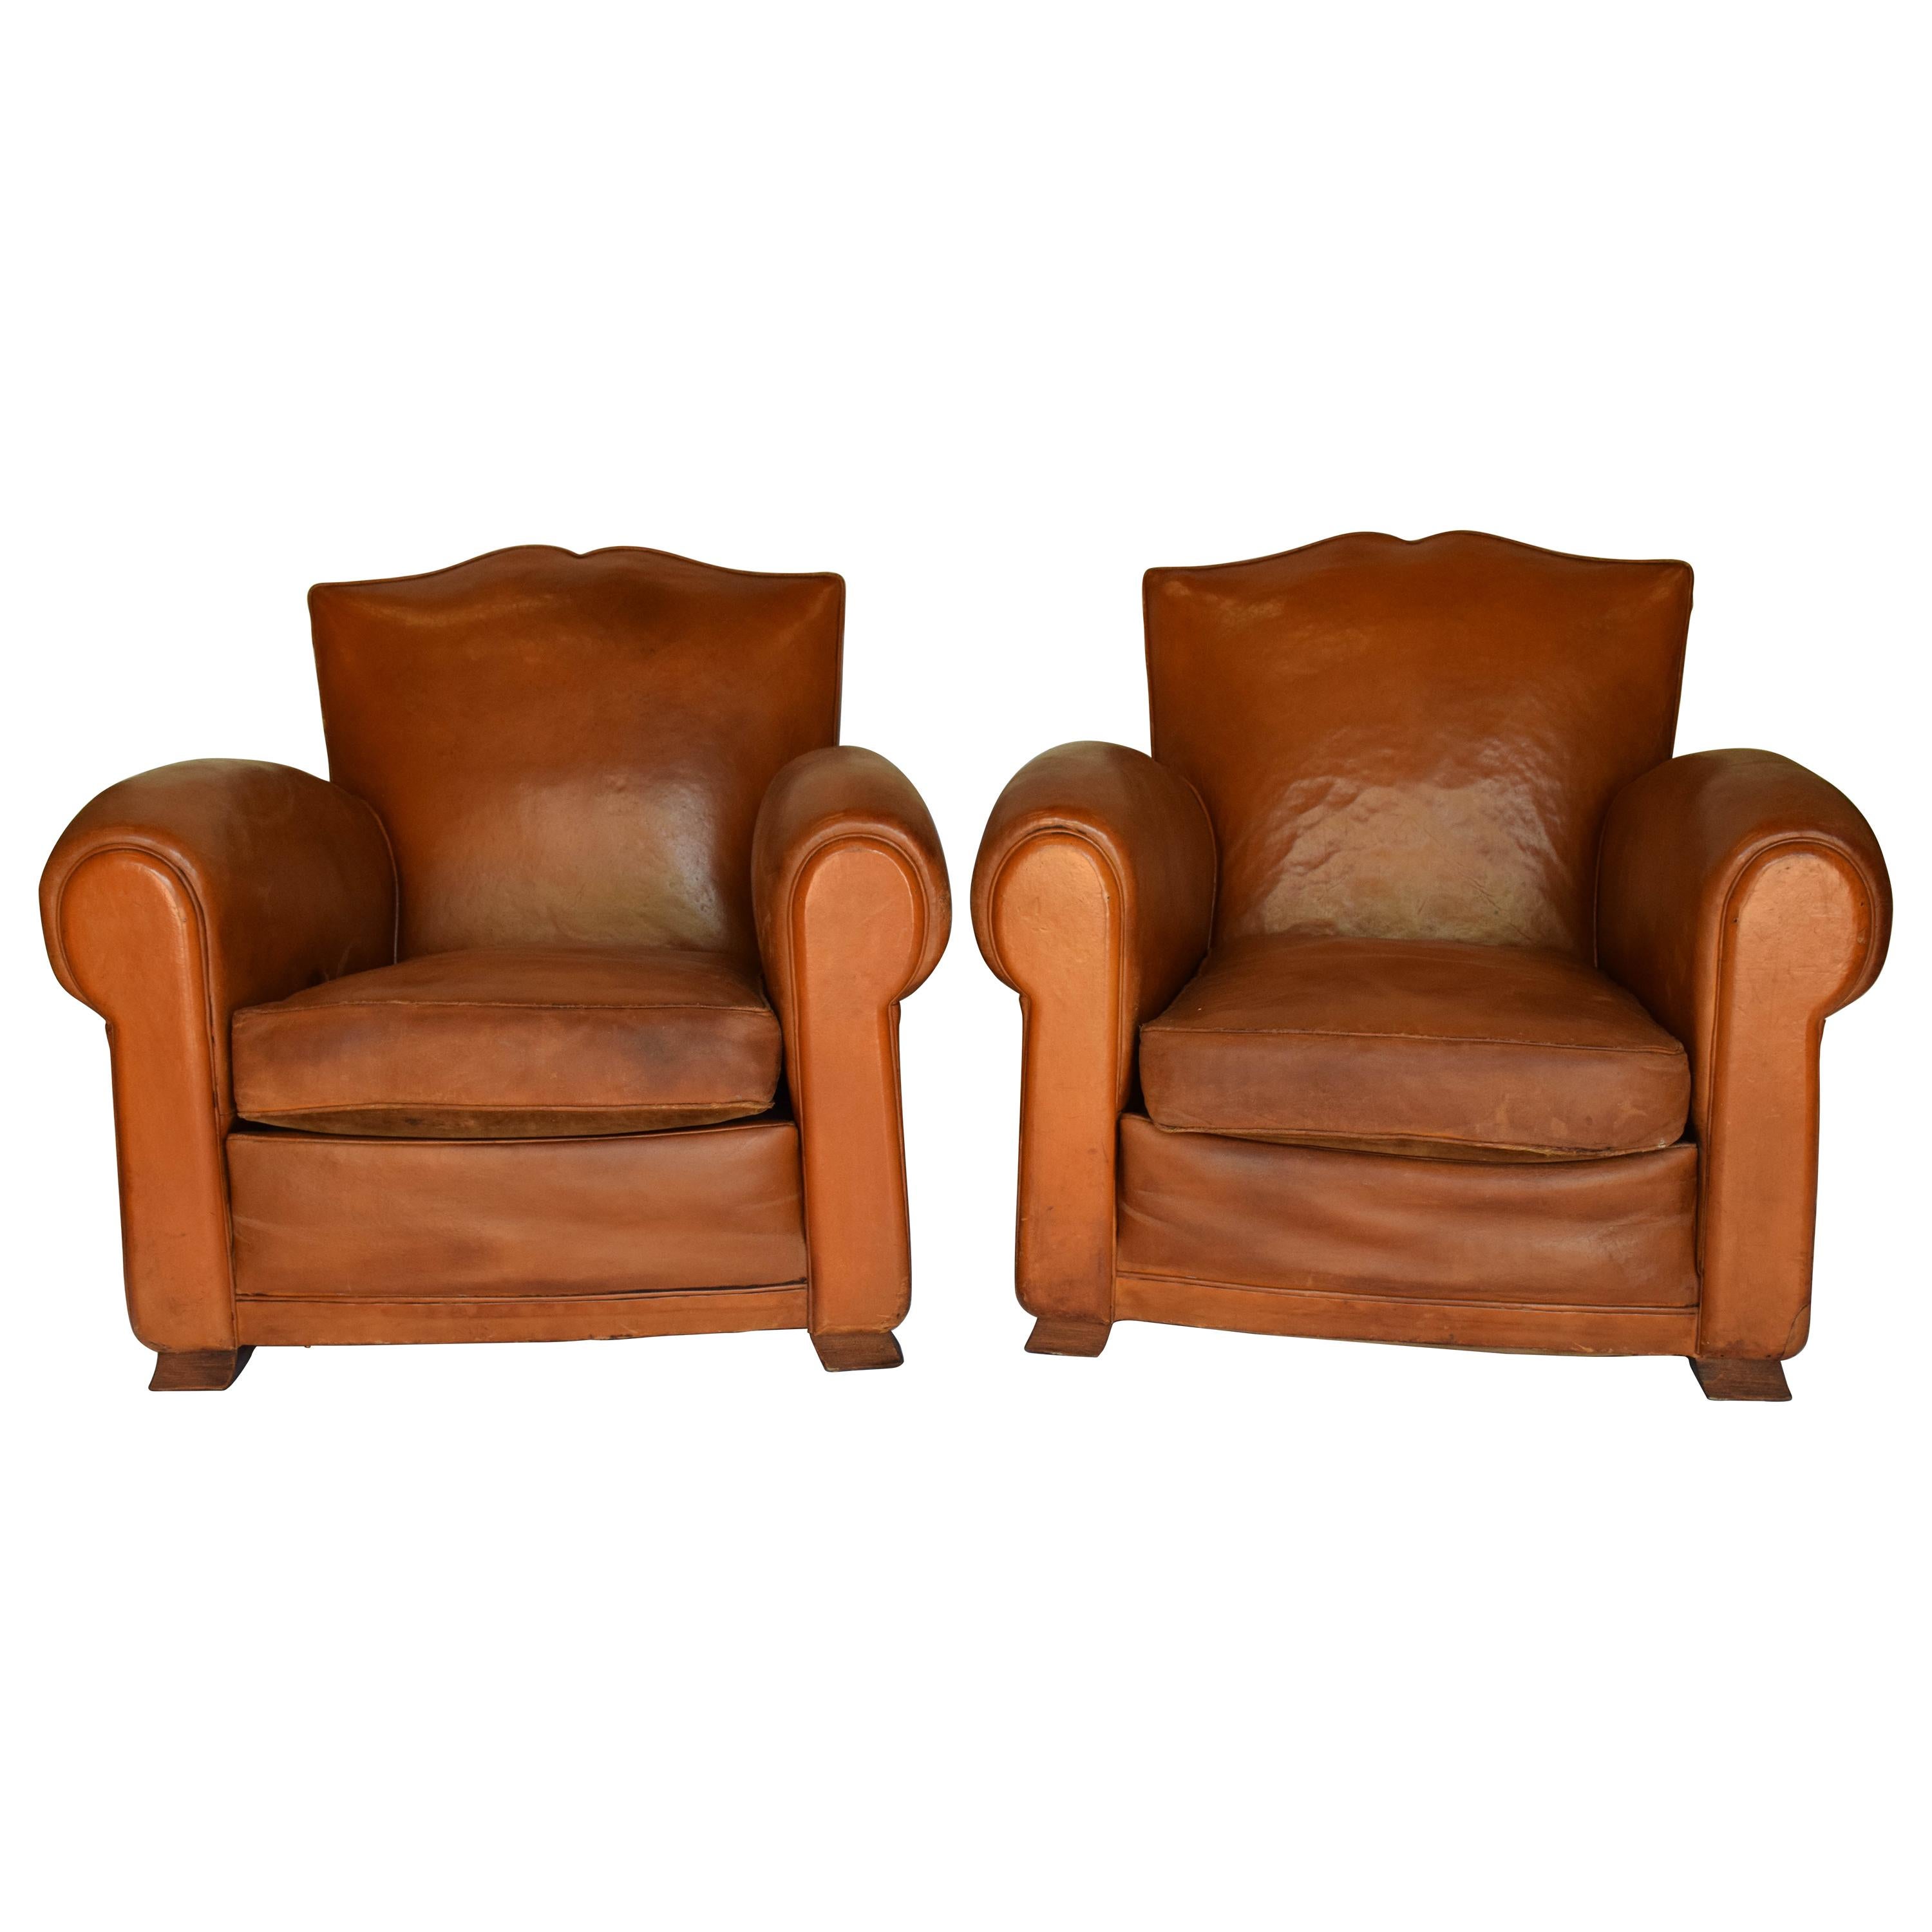 Pair of 1930s Leather Moustache Leather Club Chairs